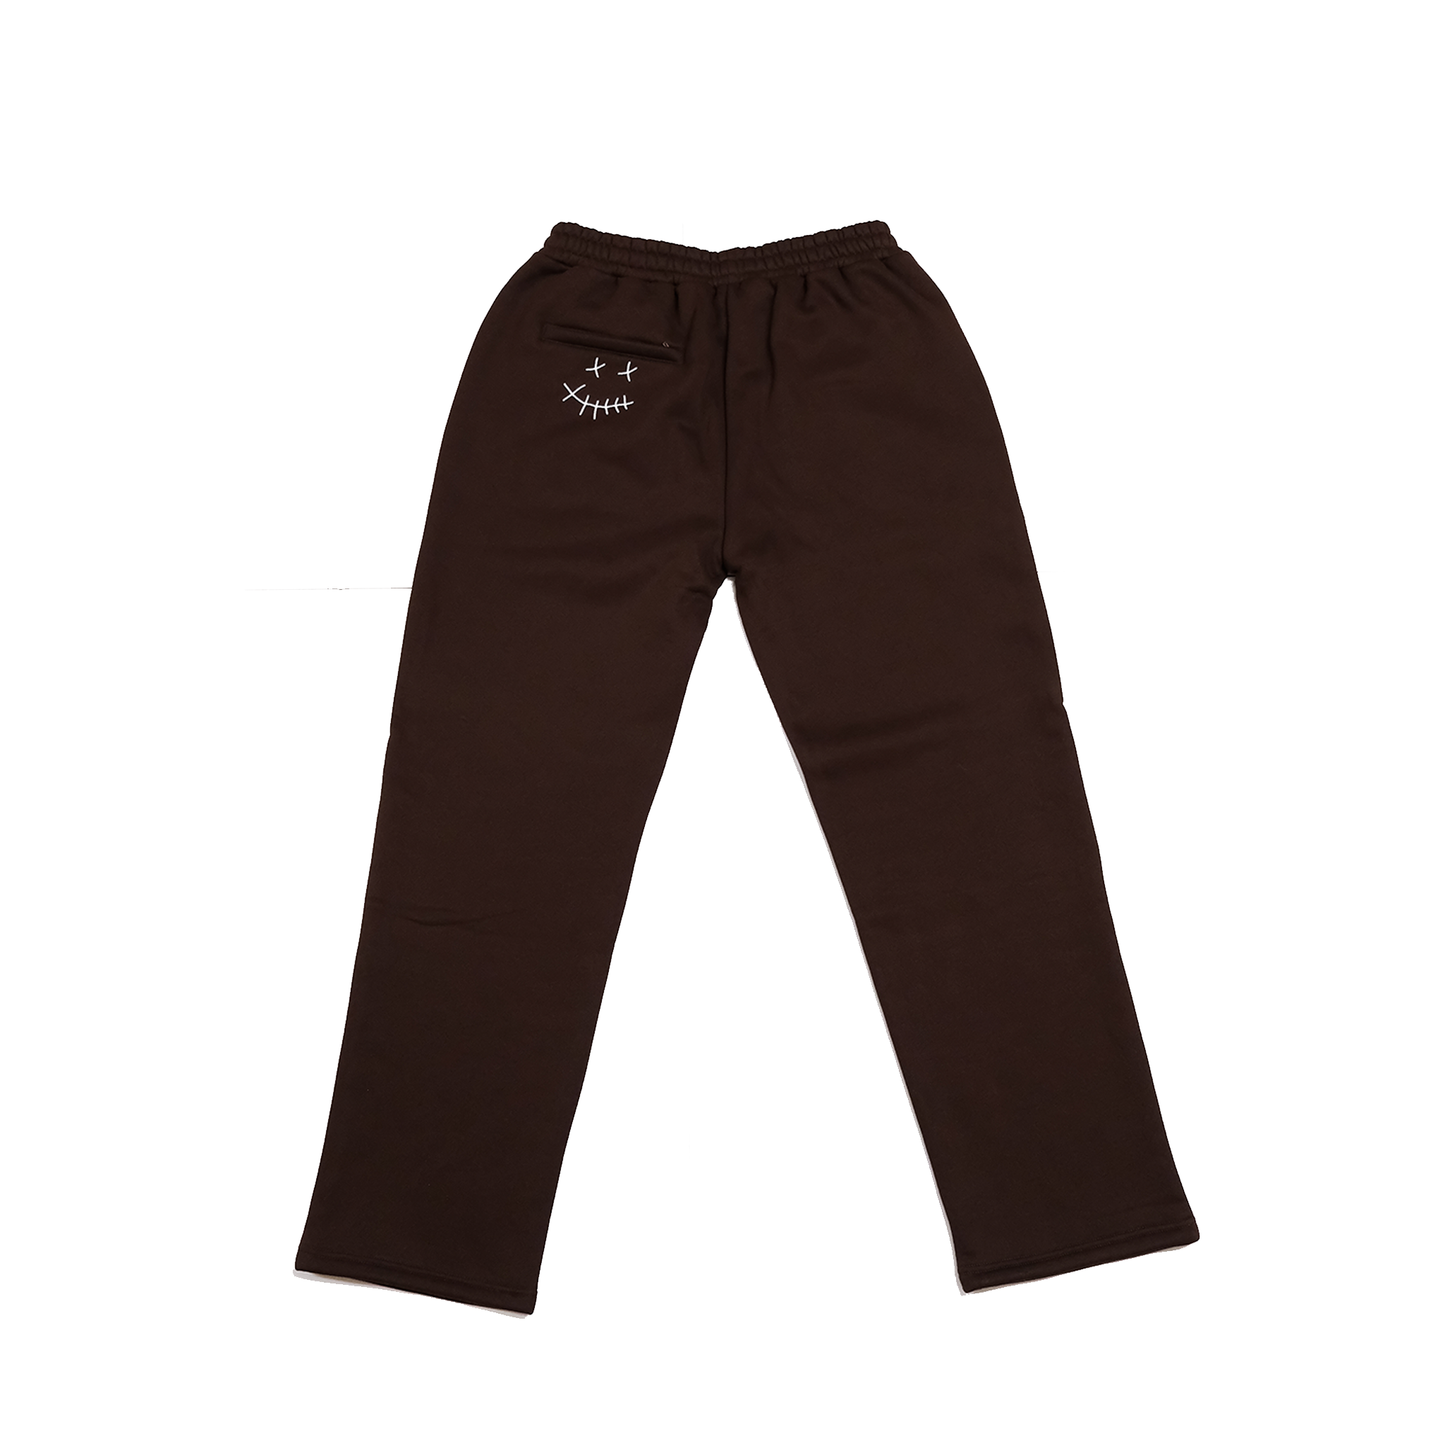 *SALE* 'THE DAILY' COFFEE SWEATPANTS (BROWN)